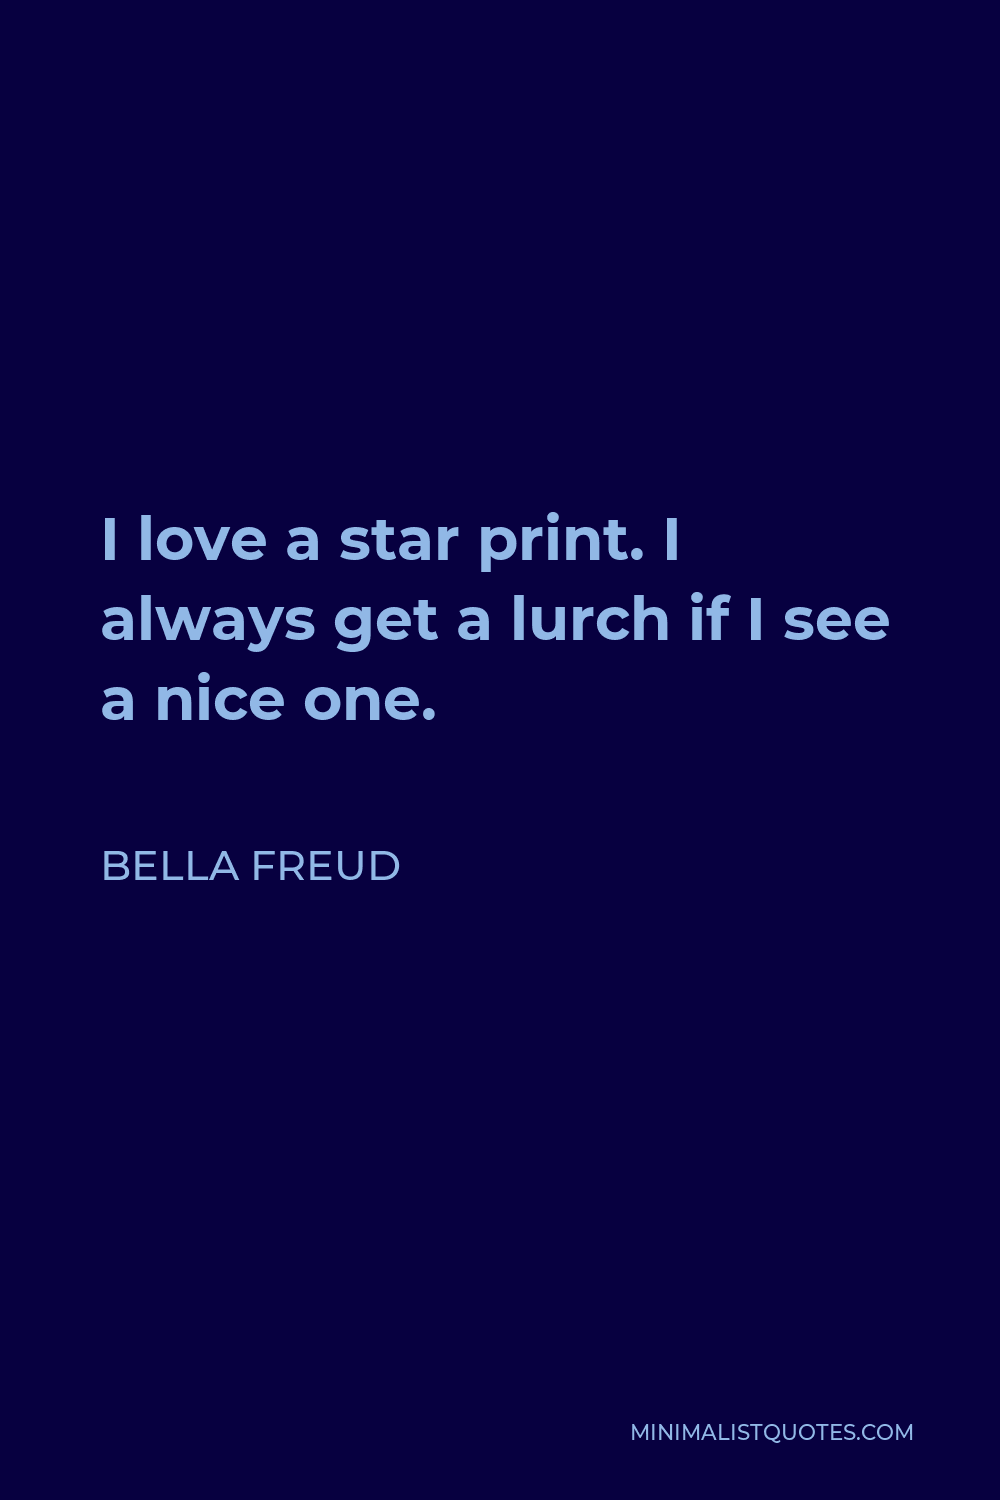 Bella Freud Quote - I love a star print. I always get a lurch if I see a nice one.